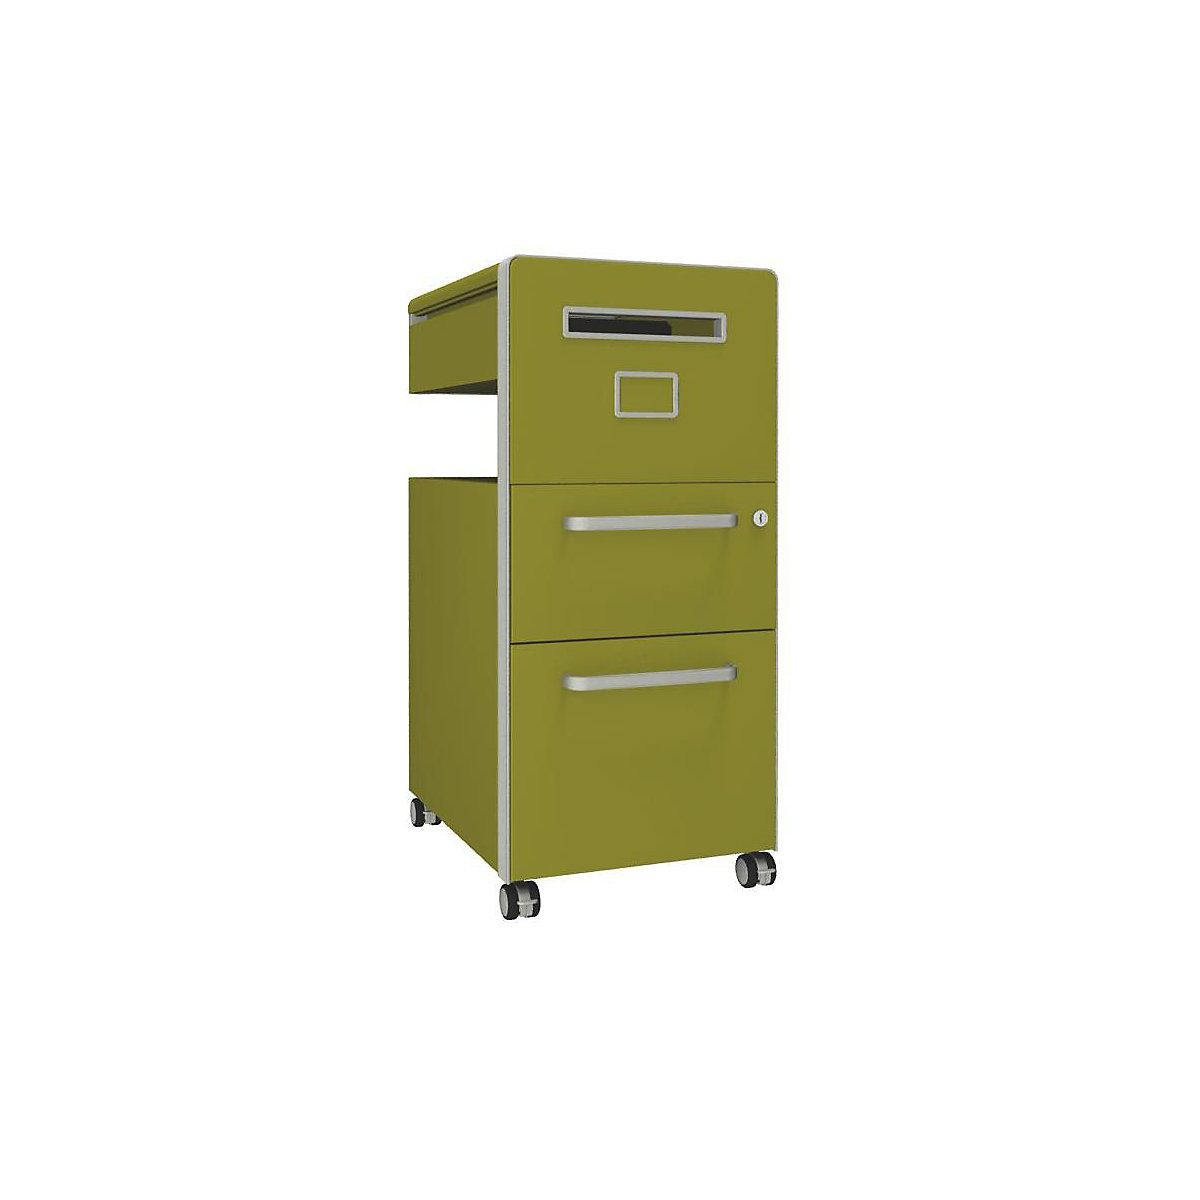 Bite™ pedestal furniture, with 1 whiteboard, opens on the right side – BISLEY, with 1 universal drawer, 1 suspension file drawer, tickleweed-19